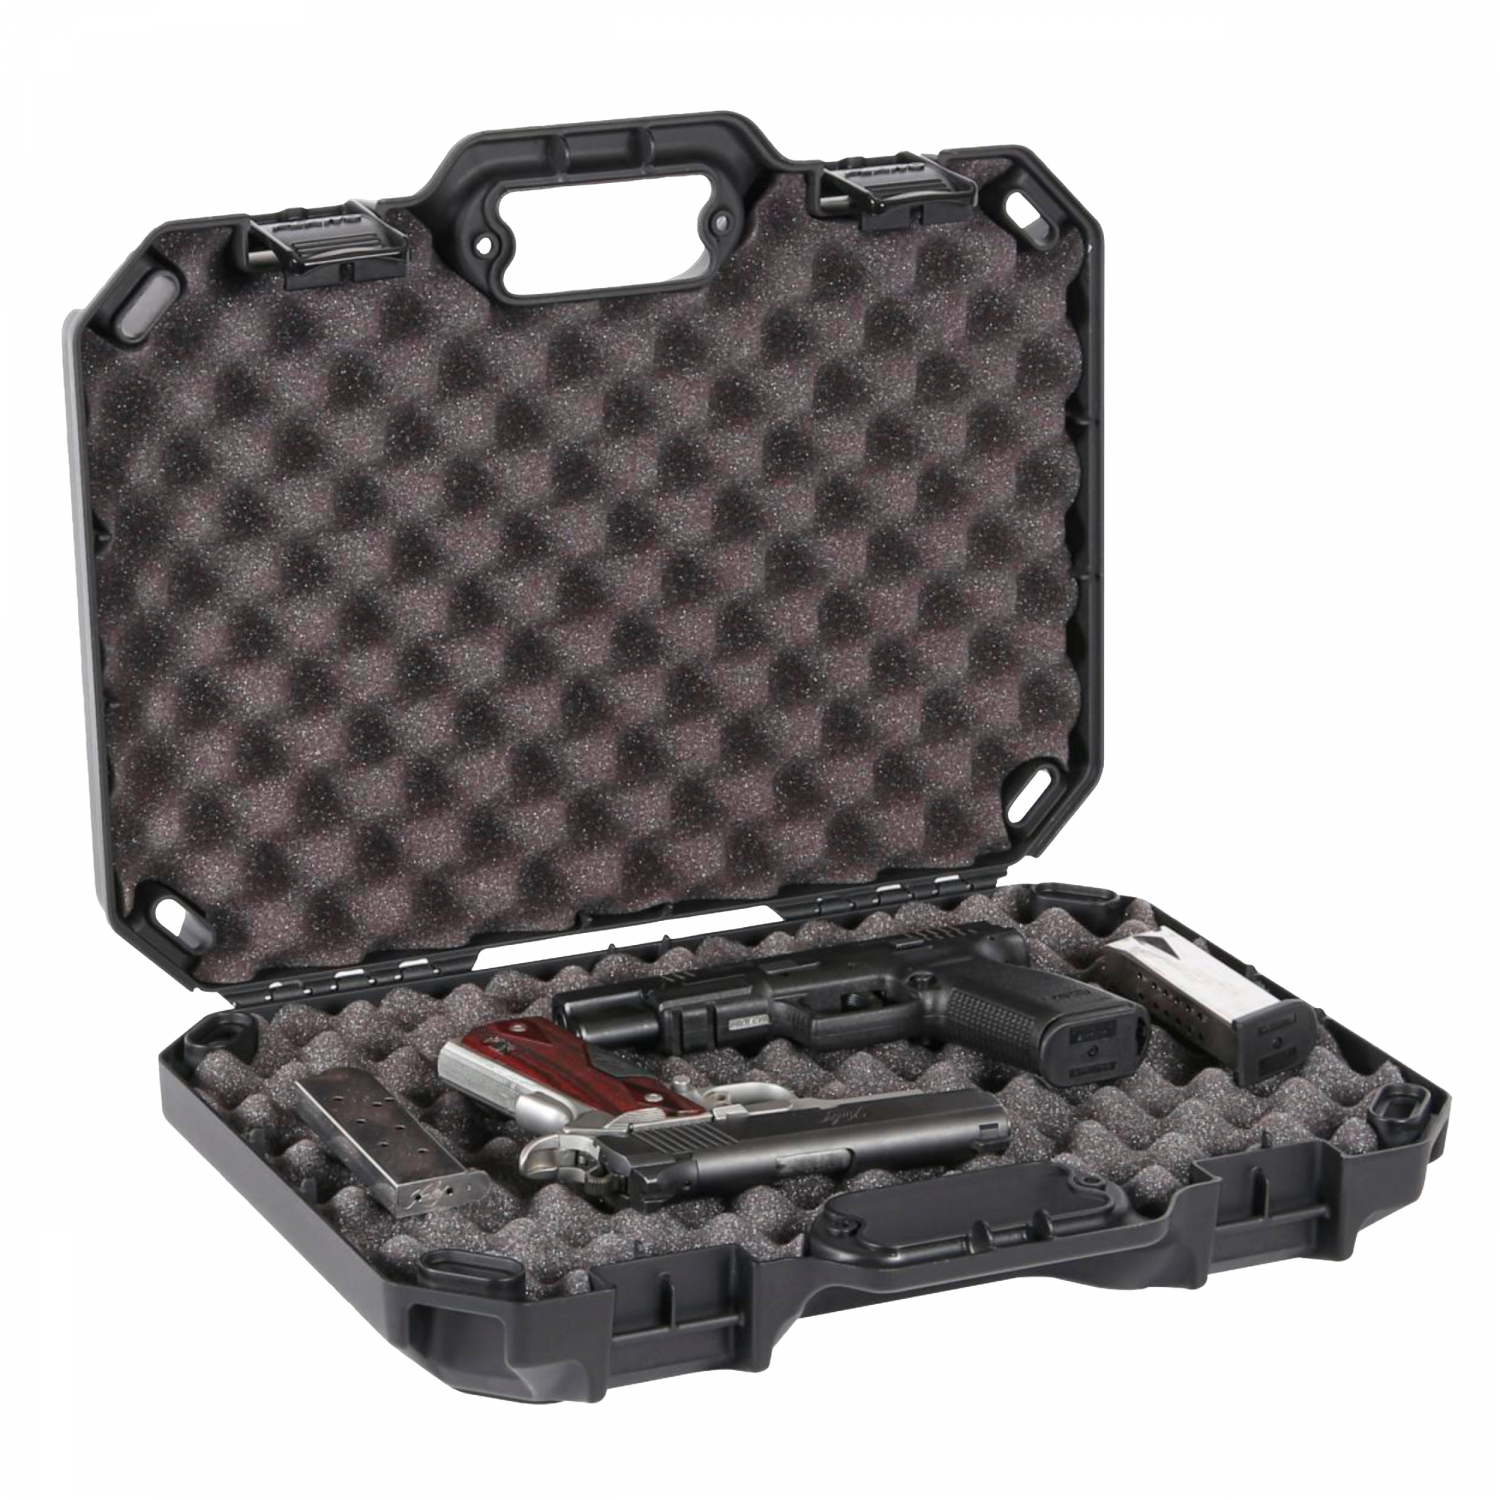 Plano Tactical Pistol Case at low prices